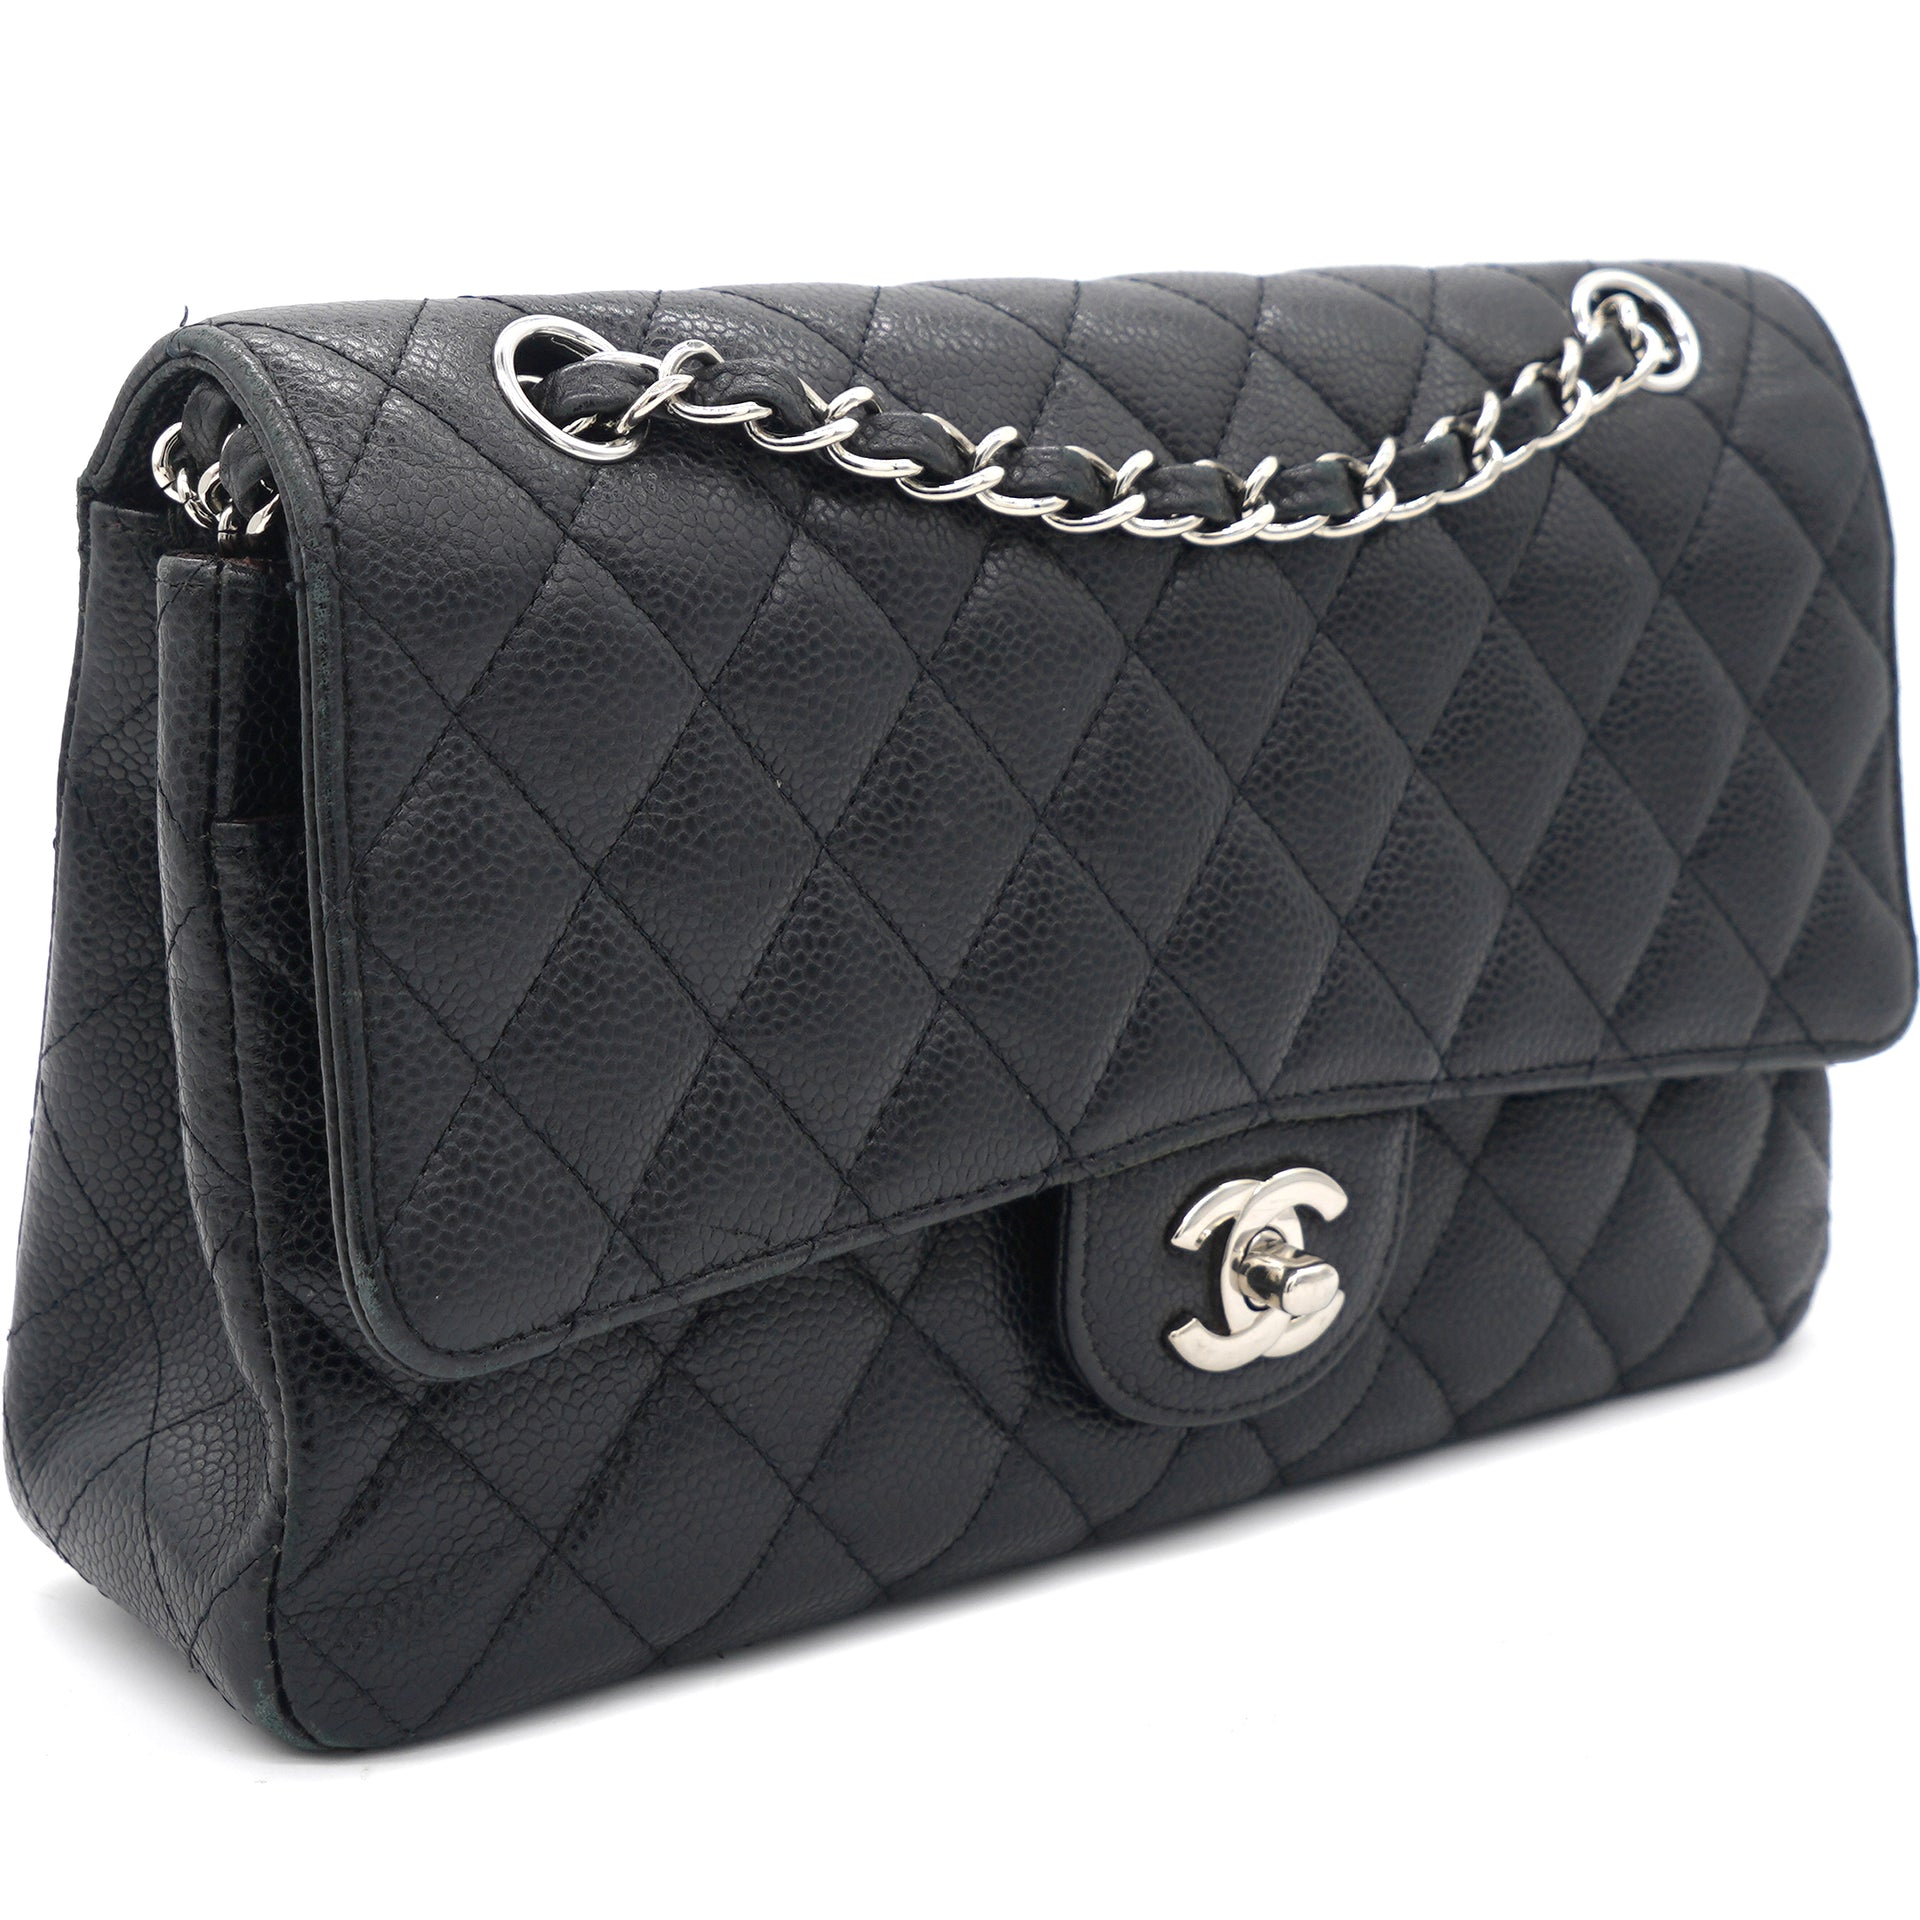 Caviar Quilted Medium Double Flap Black SHW